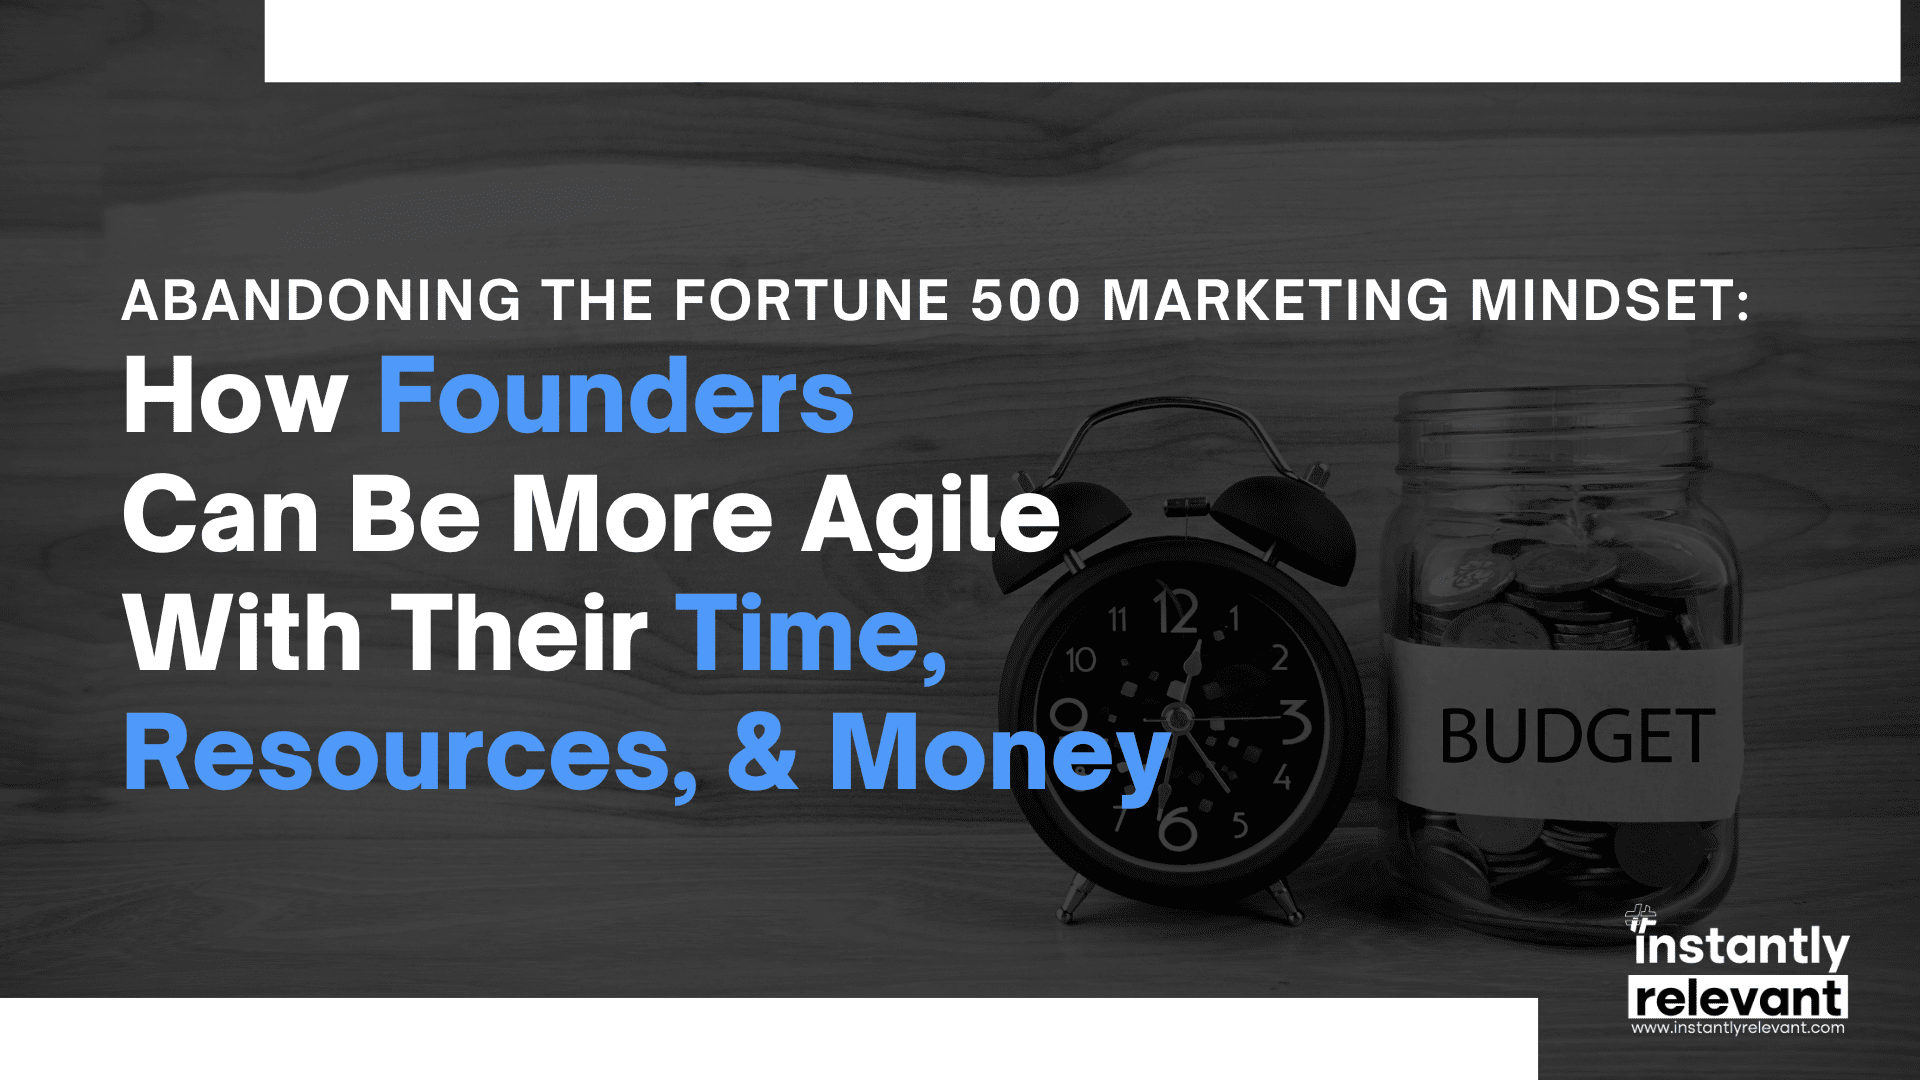 Abandoning the Fortune 500 Marketing Mindset: How Founders Can Be More Agile With Their Time, Resources, & Money